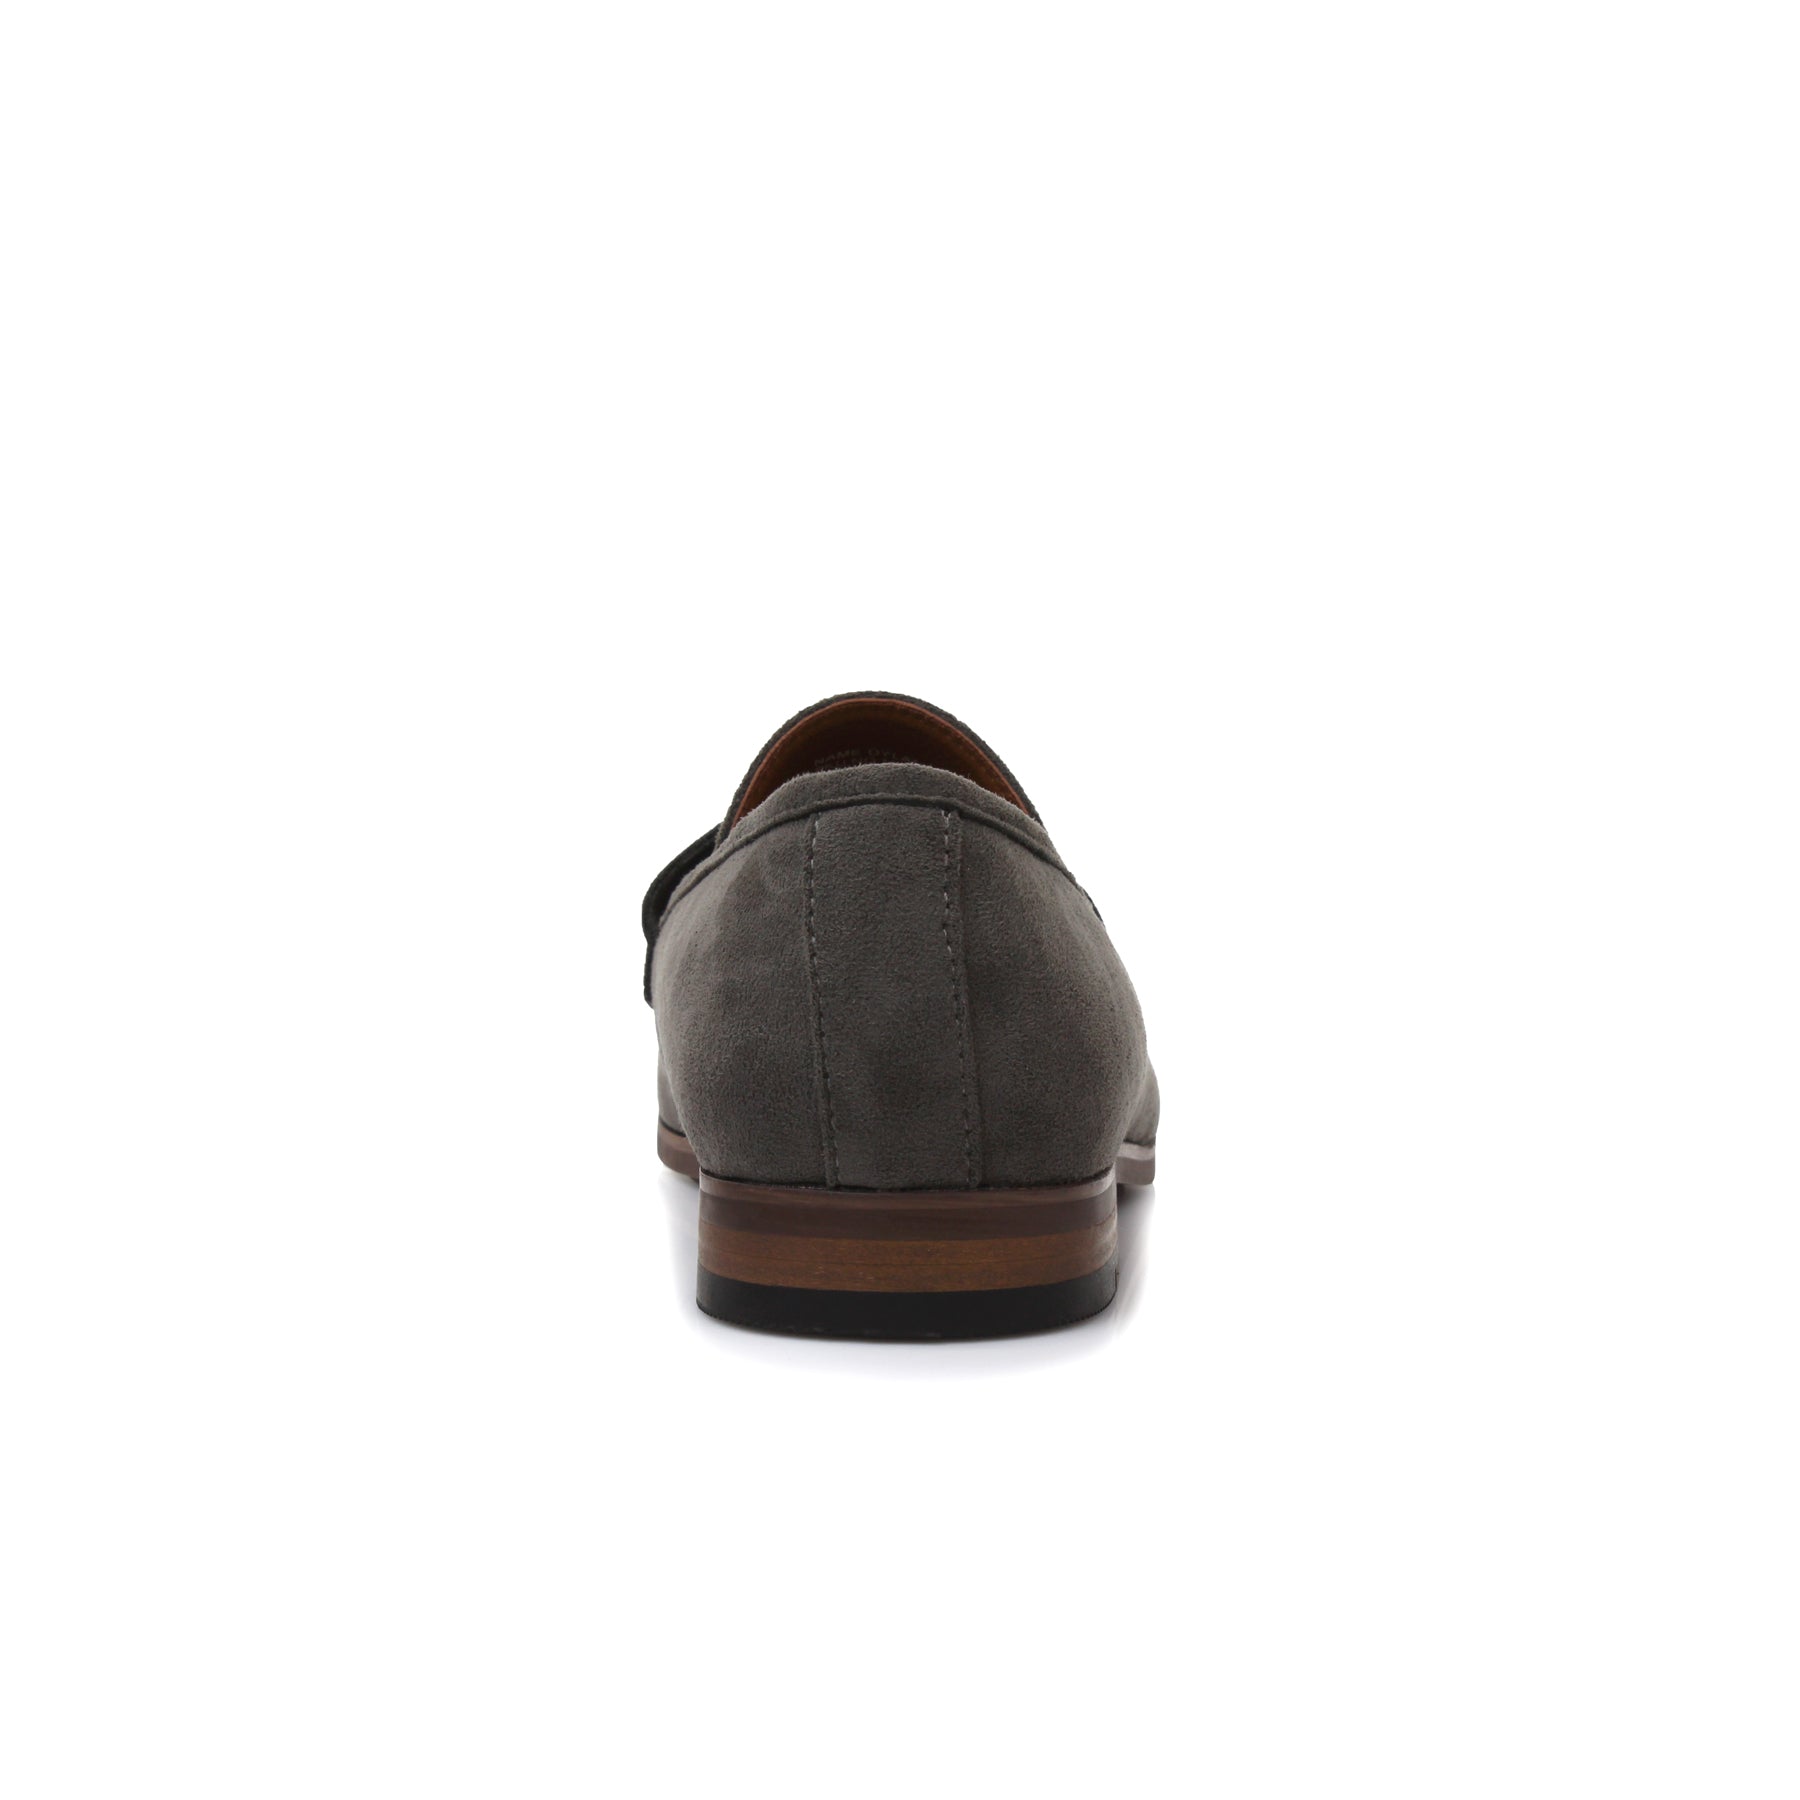 Suede Penny Loafers | Dylan by Ferro Aldo | Conal Footwear | Back Angle View